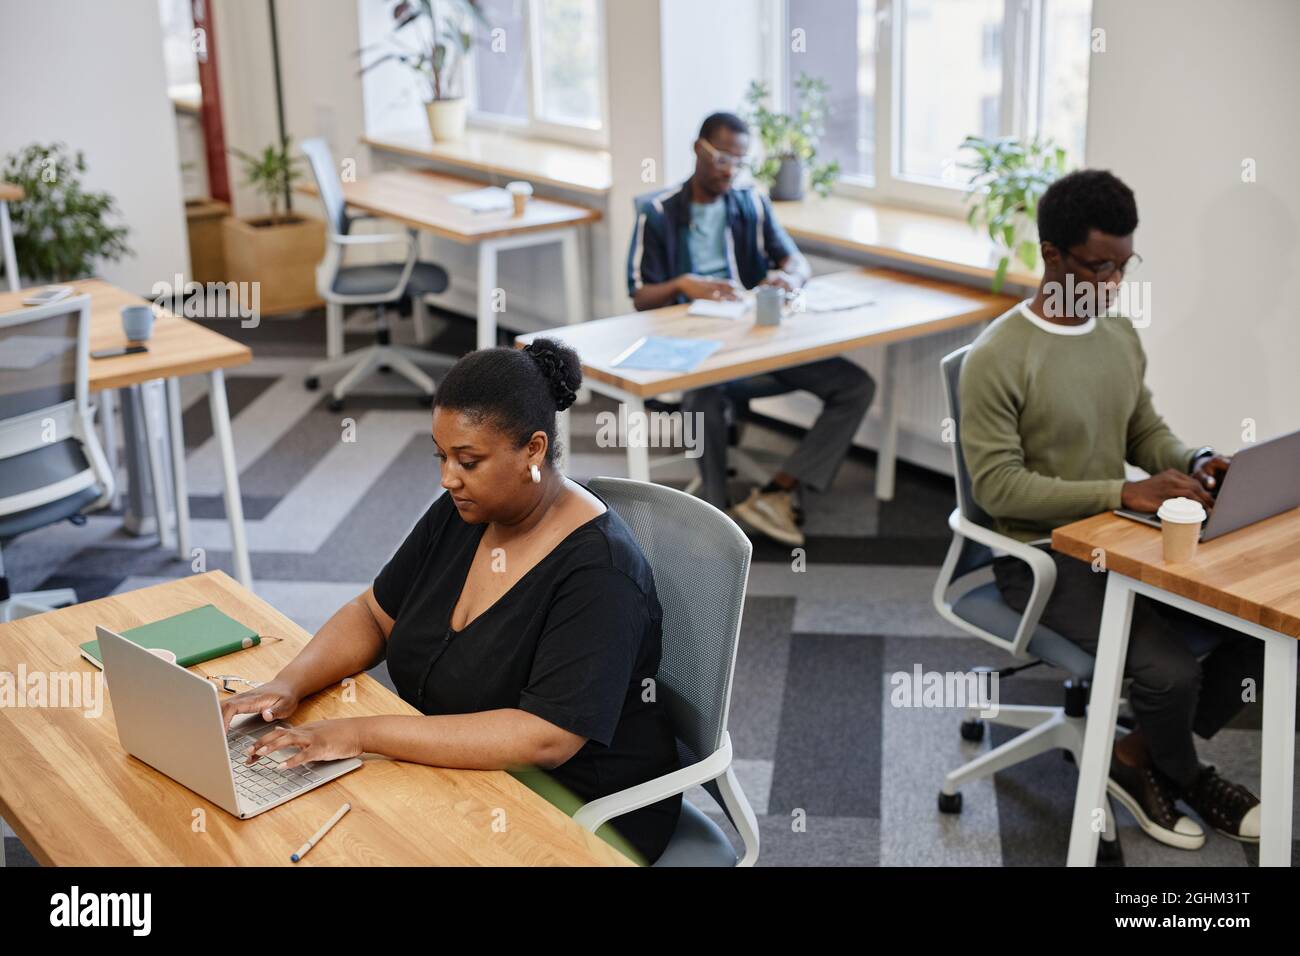 Serious Black businesswoman renting desk in open space coworking center Stock Photo